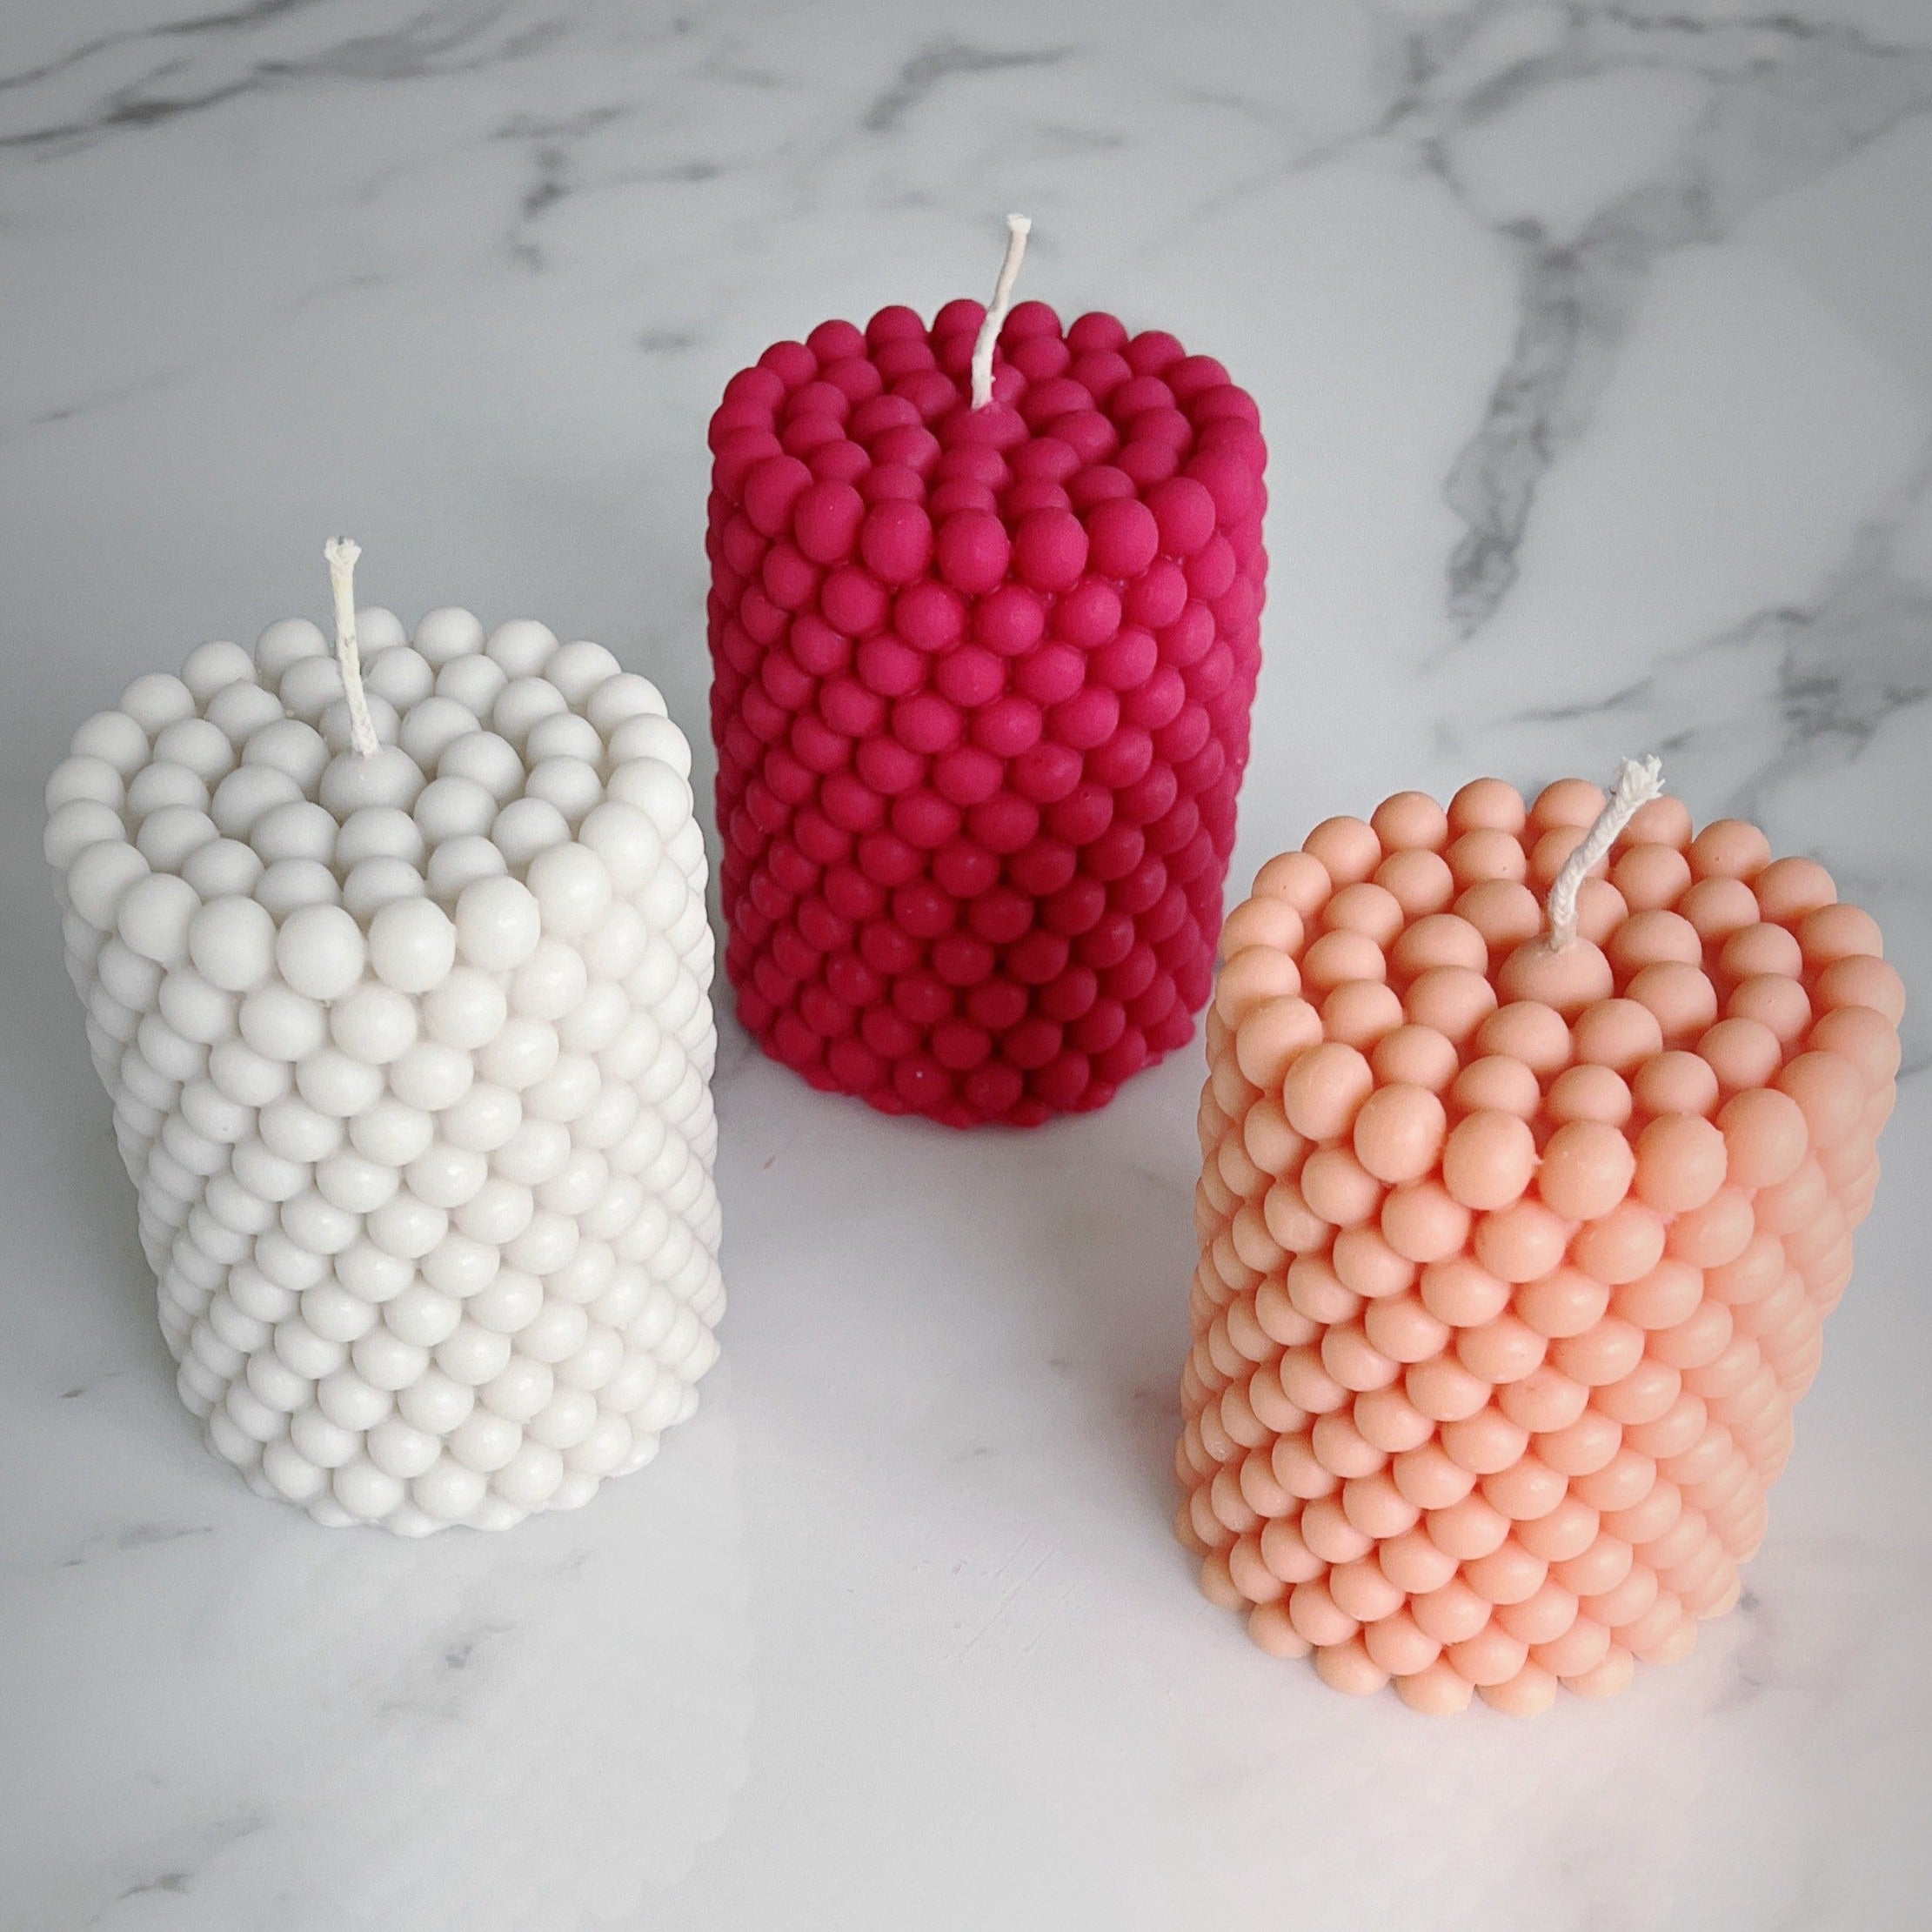 Cylinder Soy Bubble Candle - Various Colors Available